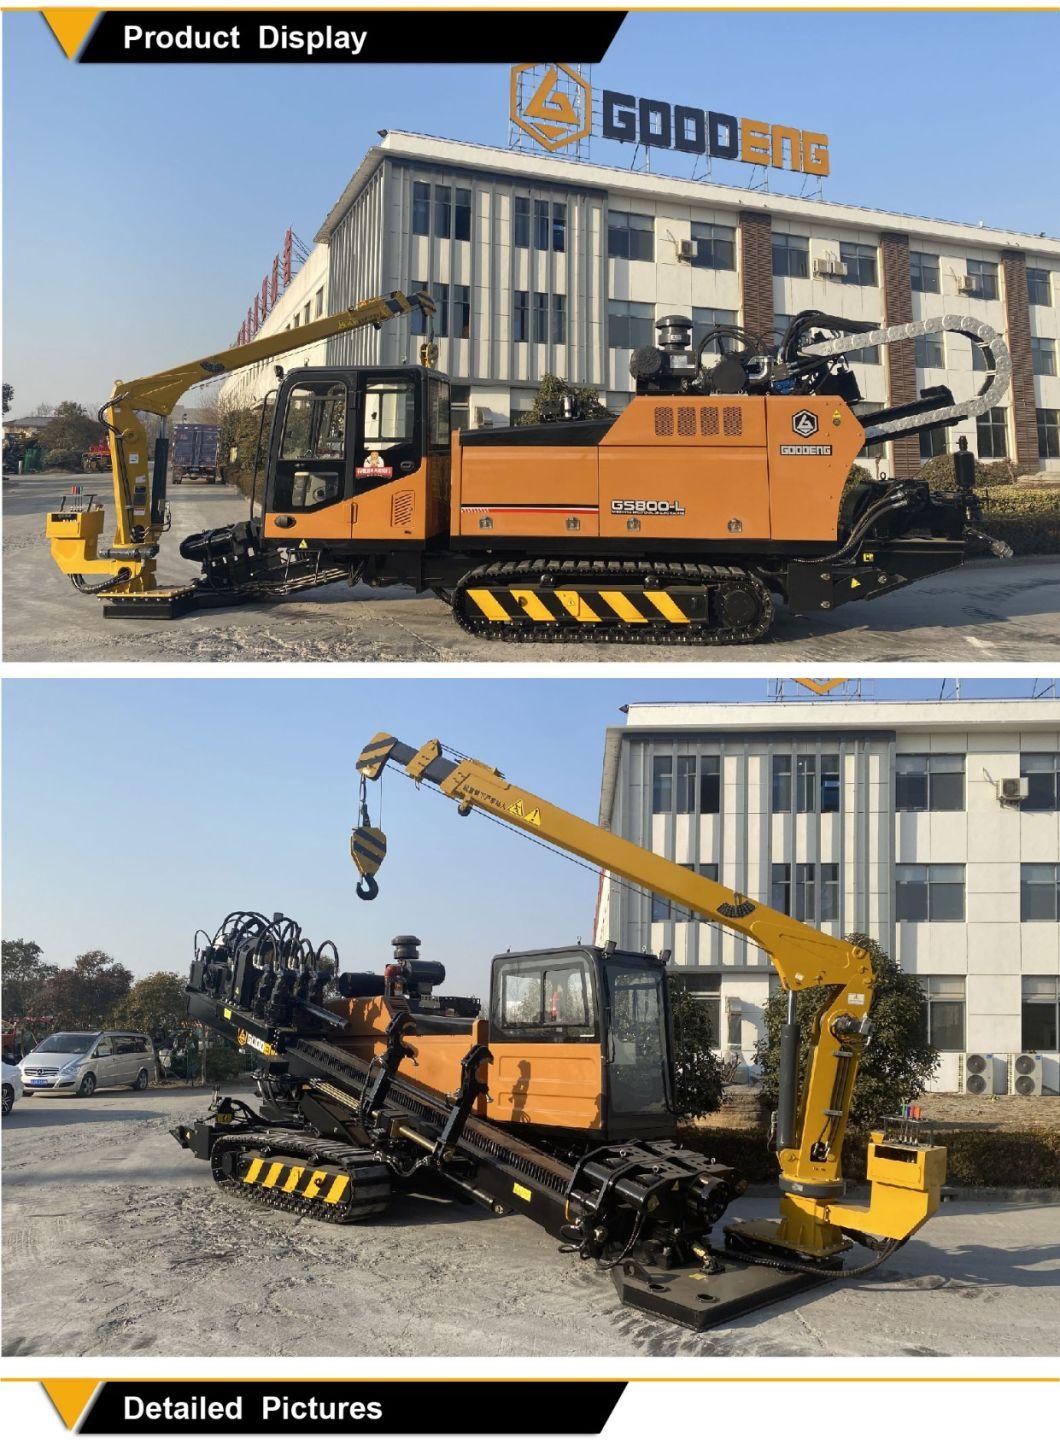 GS800-LS trenchless machine drilling equipment equipped with rorarable manipulator